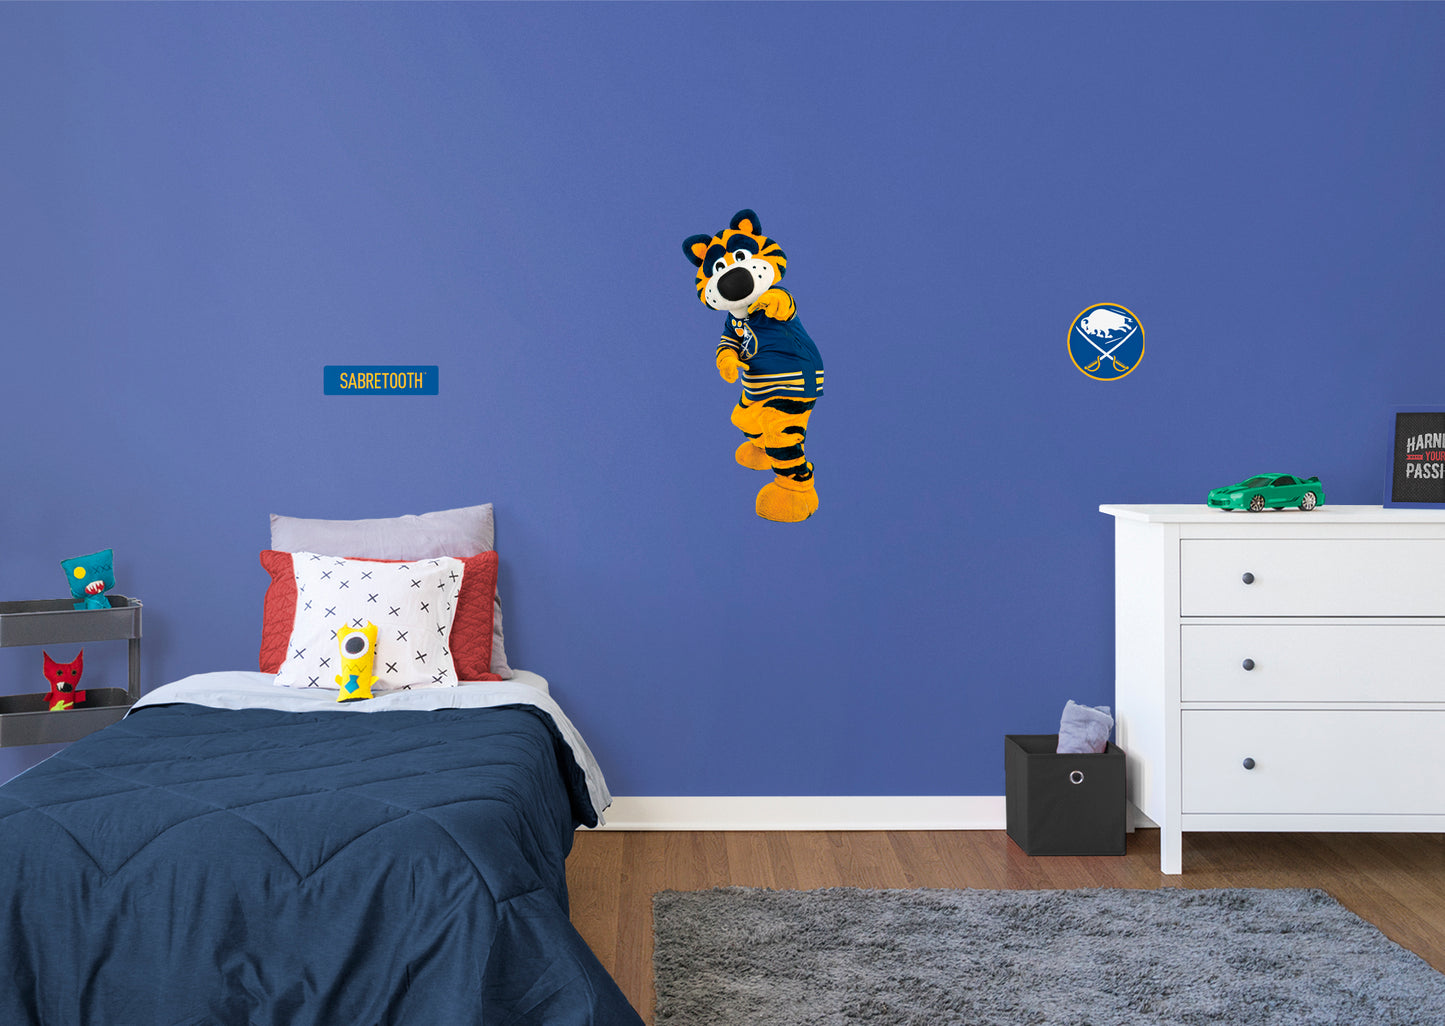 Buffalo Sabres: Sabretooth  Mascot        - Officially Licensed NHL Removable Wall   Adhesive Decal